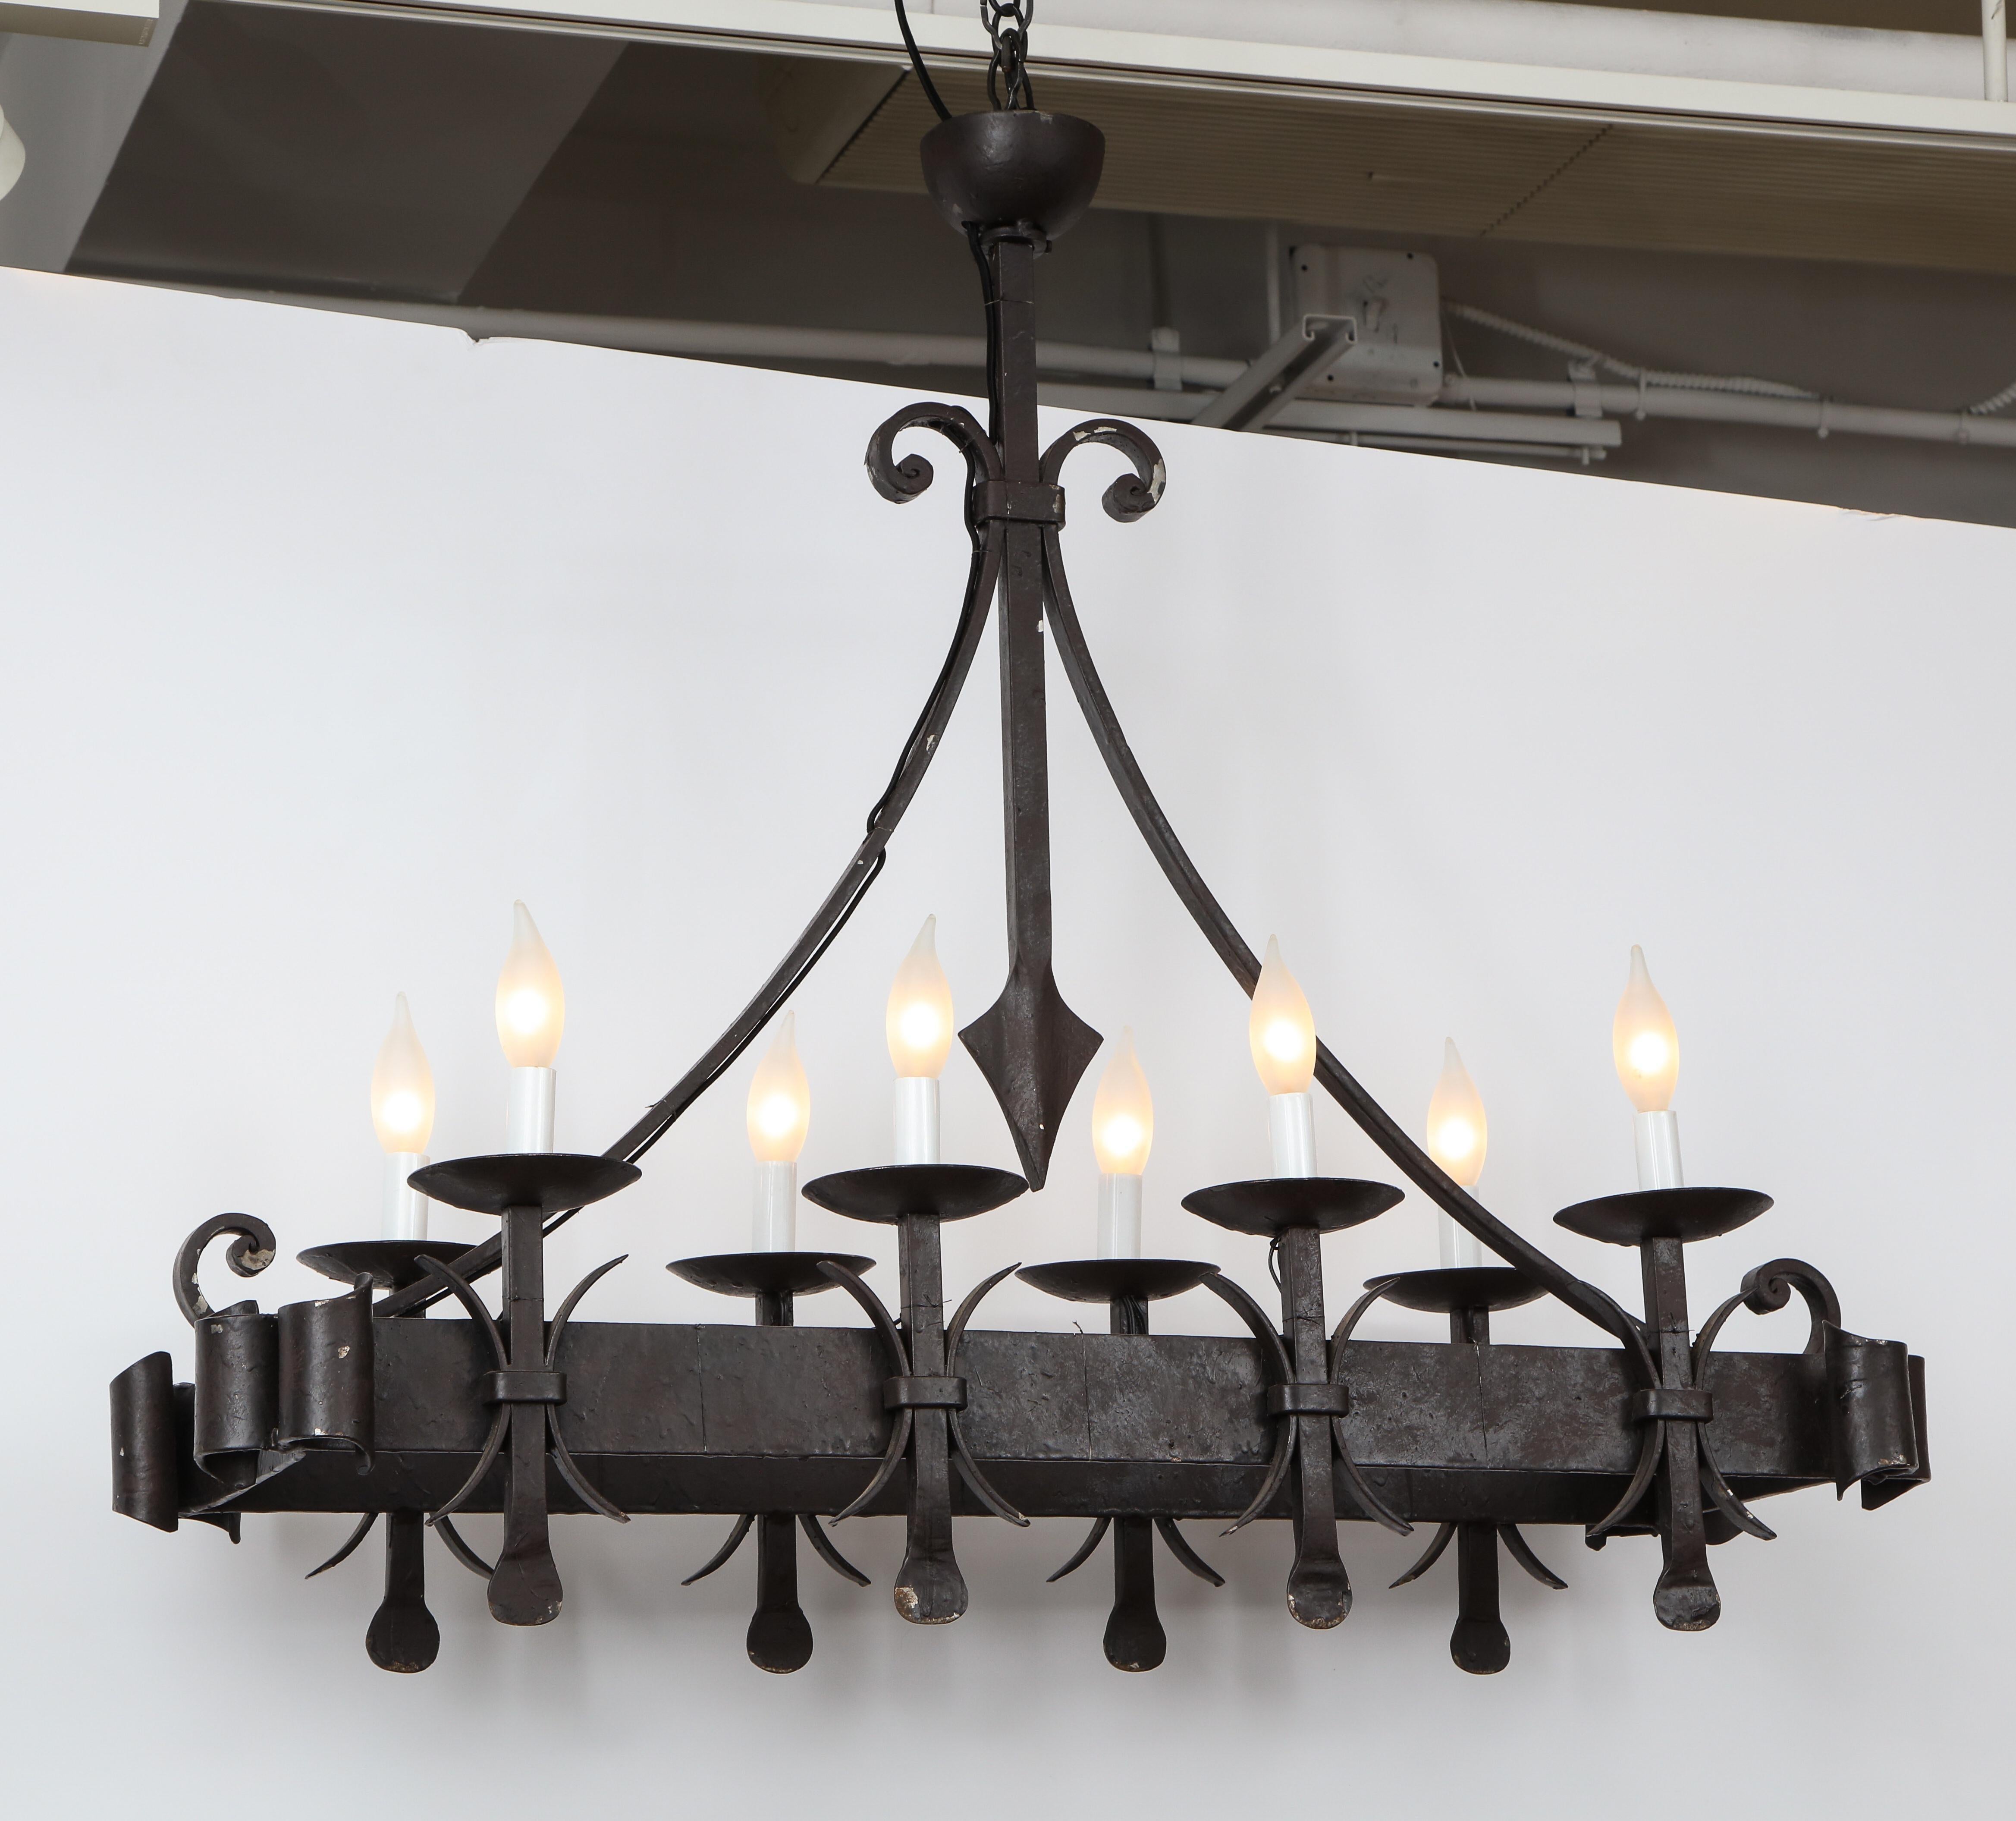 Black painted wrought iron rectangular chandelier with 8 lights.